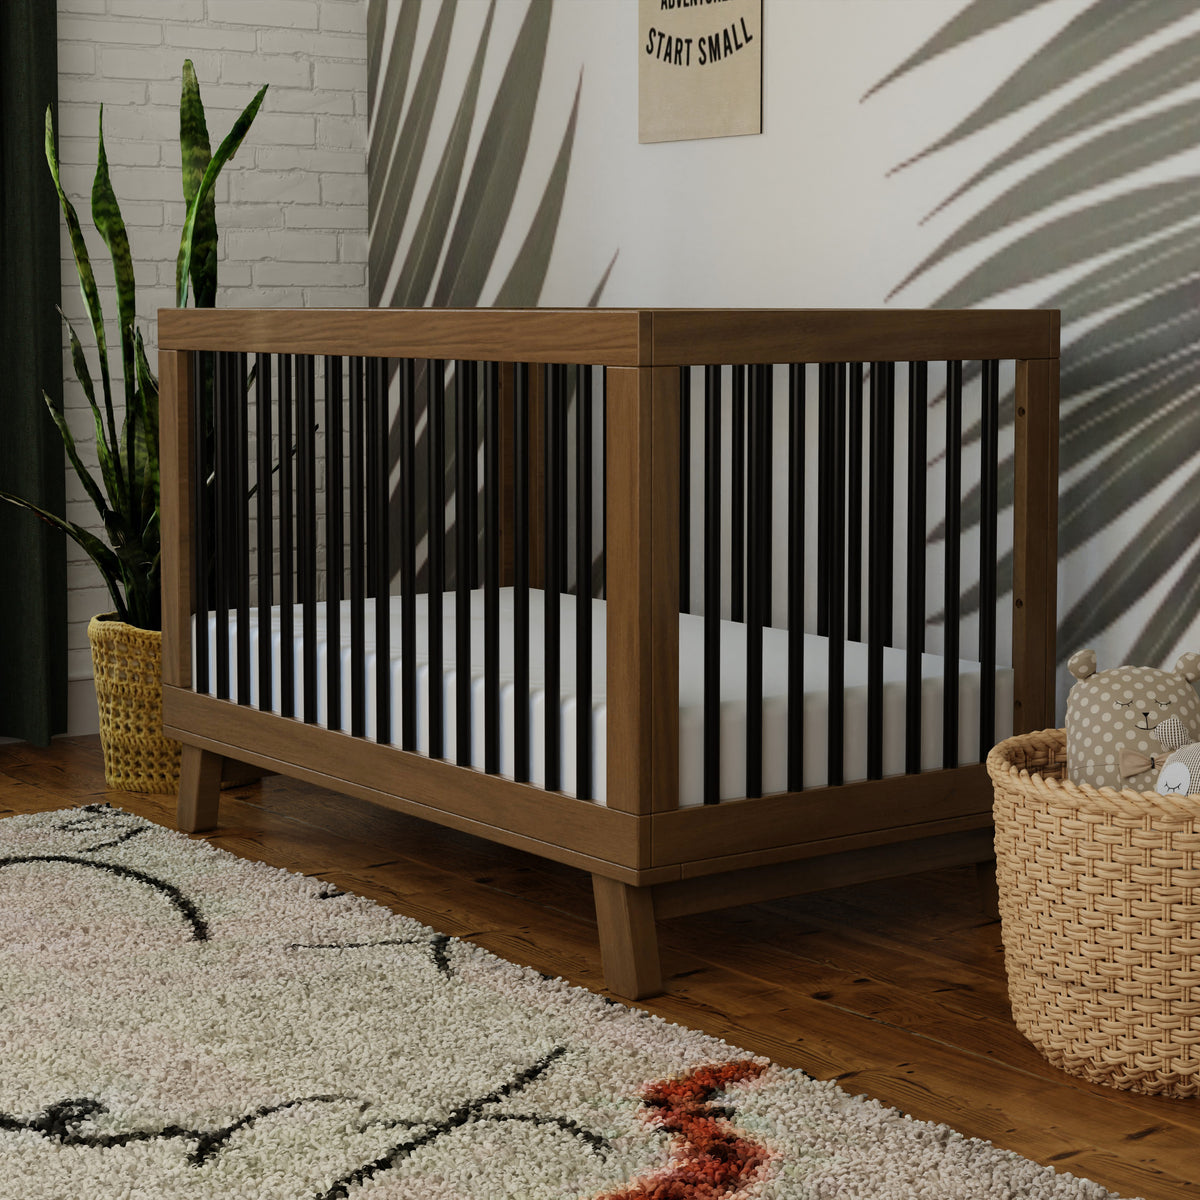  Babyletto Hudson 3-in-1 Convertible Crib with Toddler